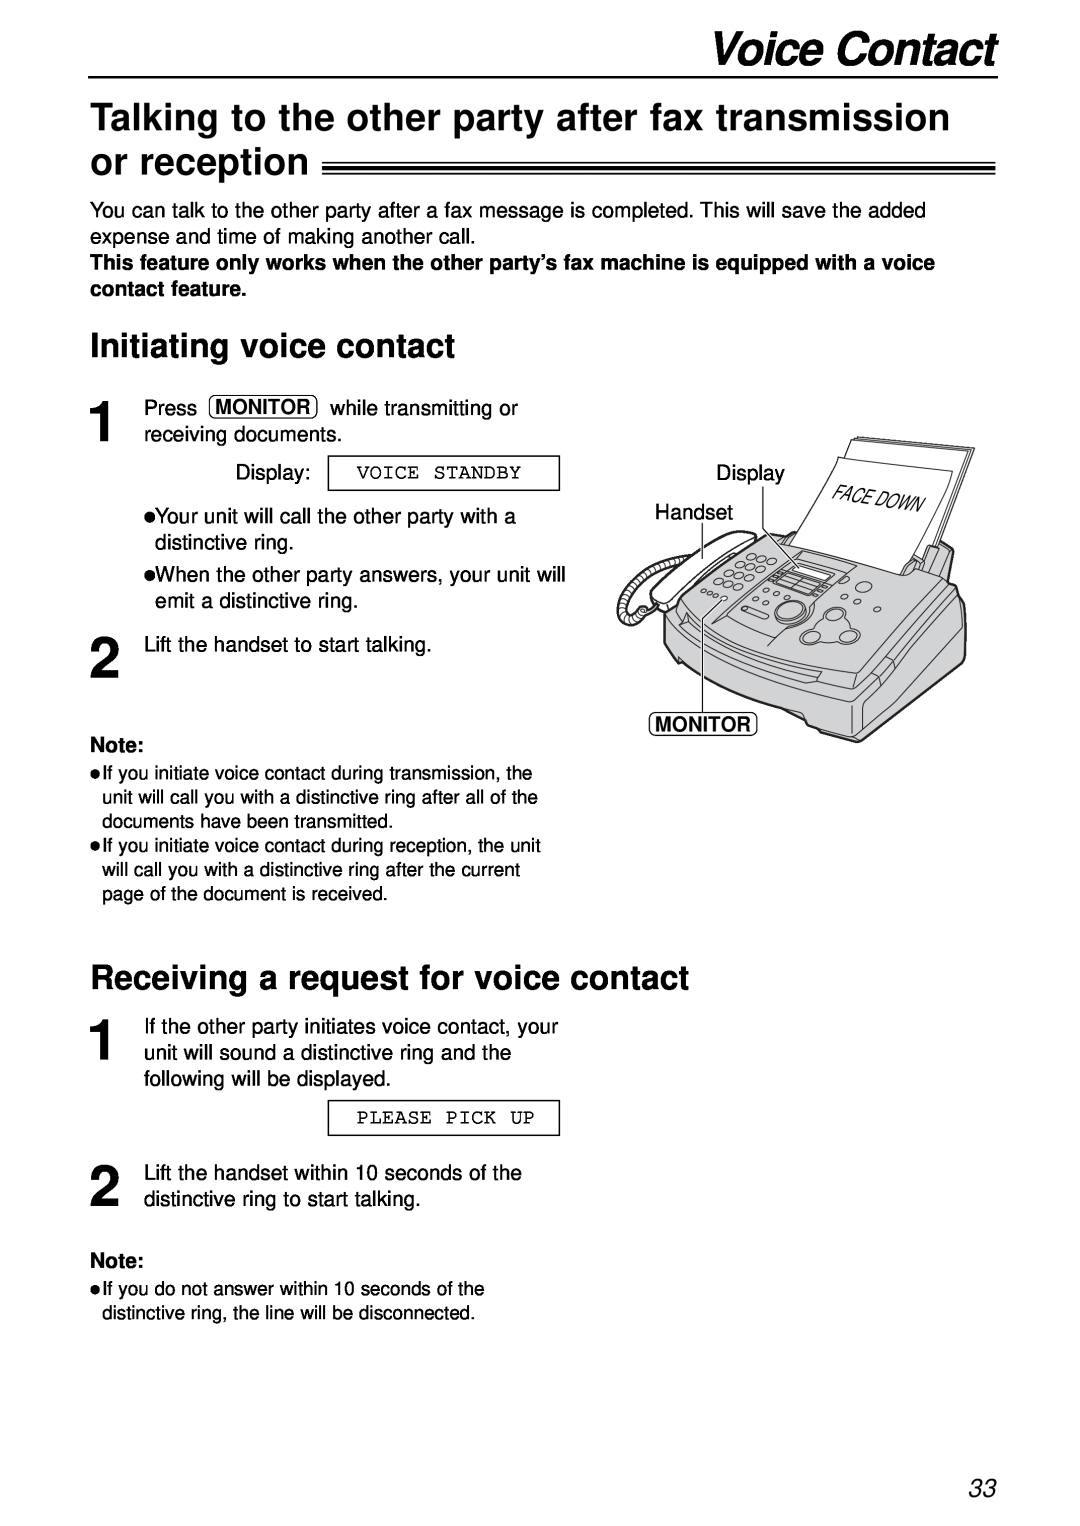 Panasonic KX-FL501NZ Voice Contact, Talking to the other party after fax transmission or reception, Press MONITOR, Monitor 